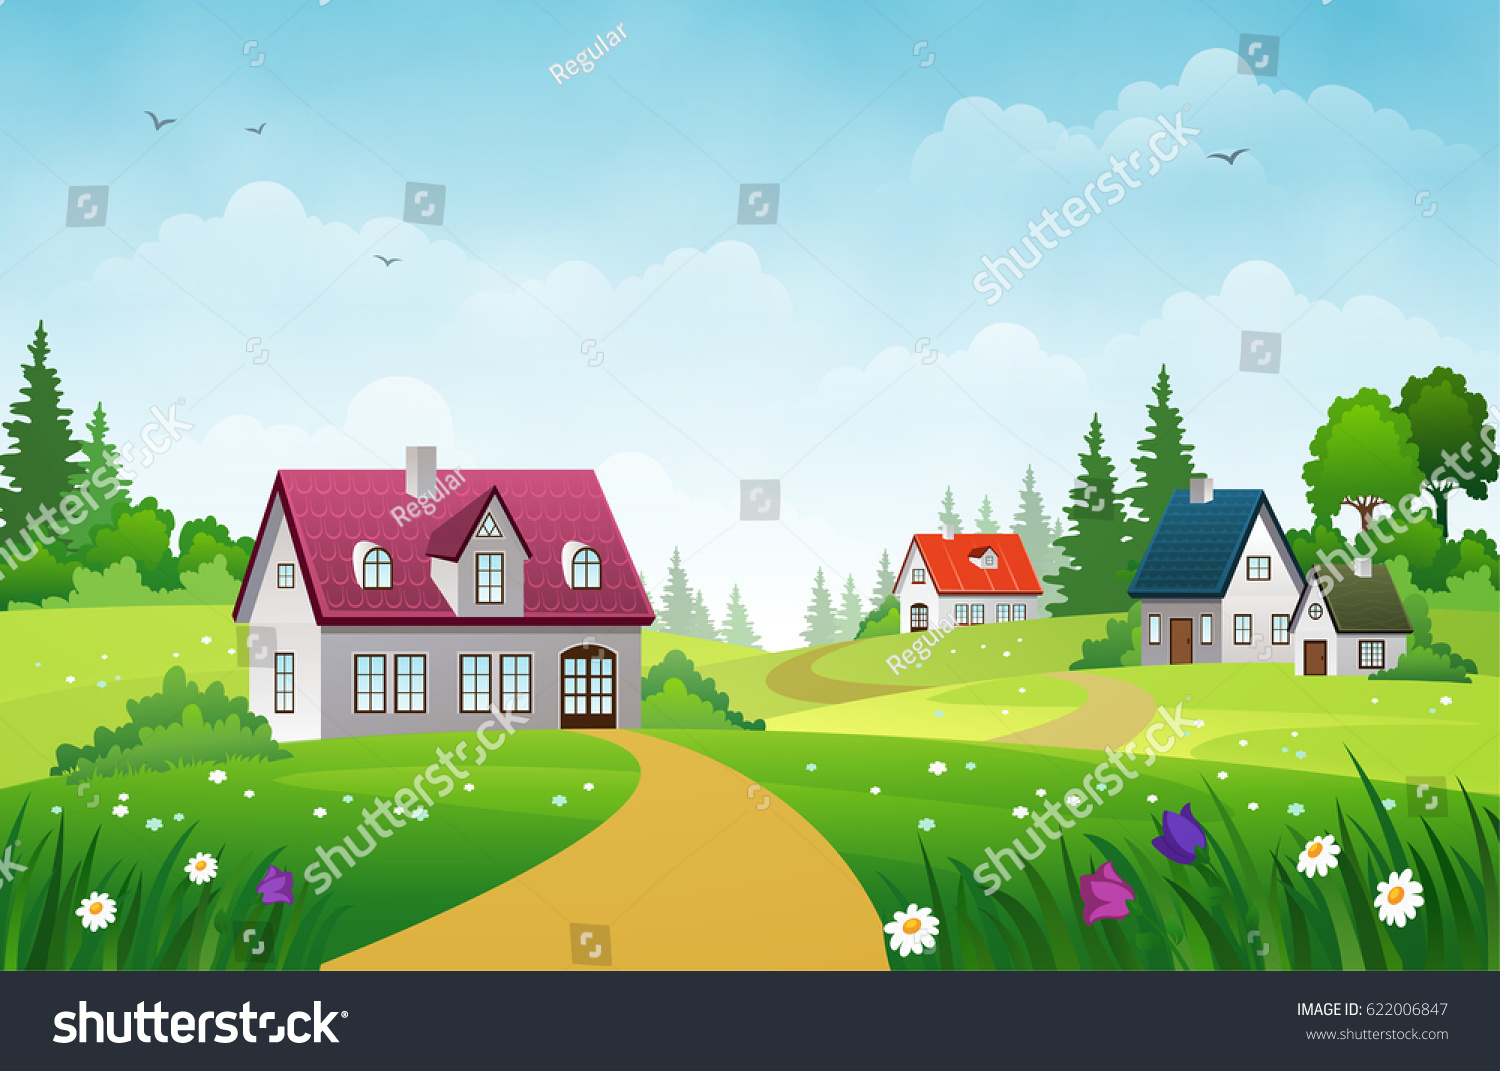 Village landscape with green lawns, hills and country houses under blue sky with clouds #622006847